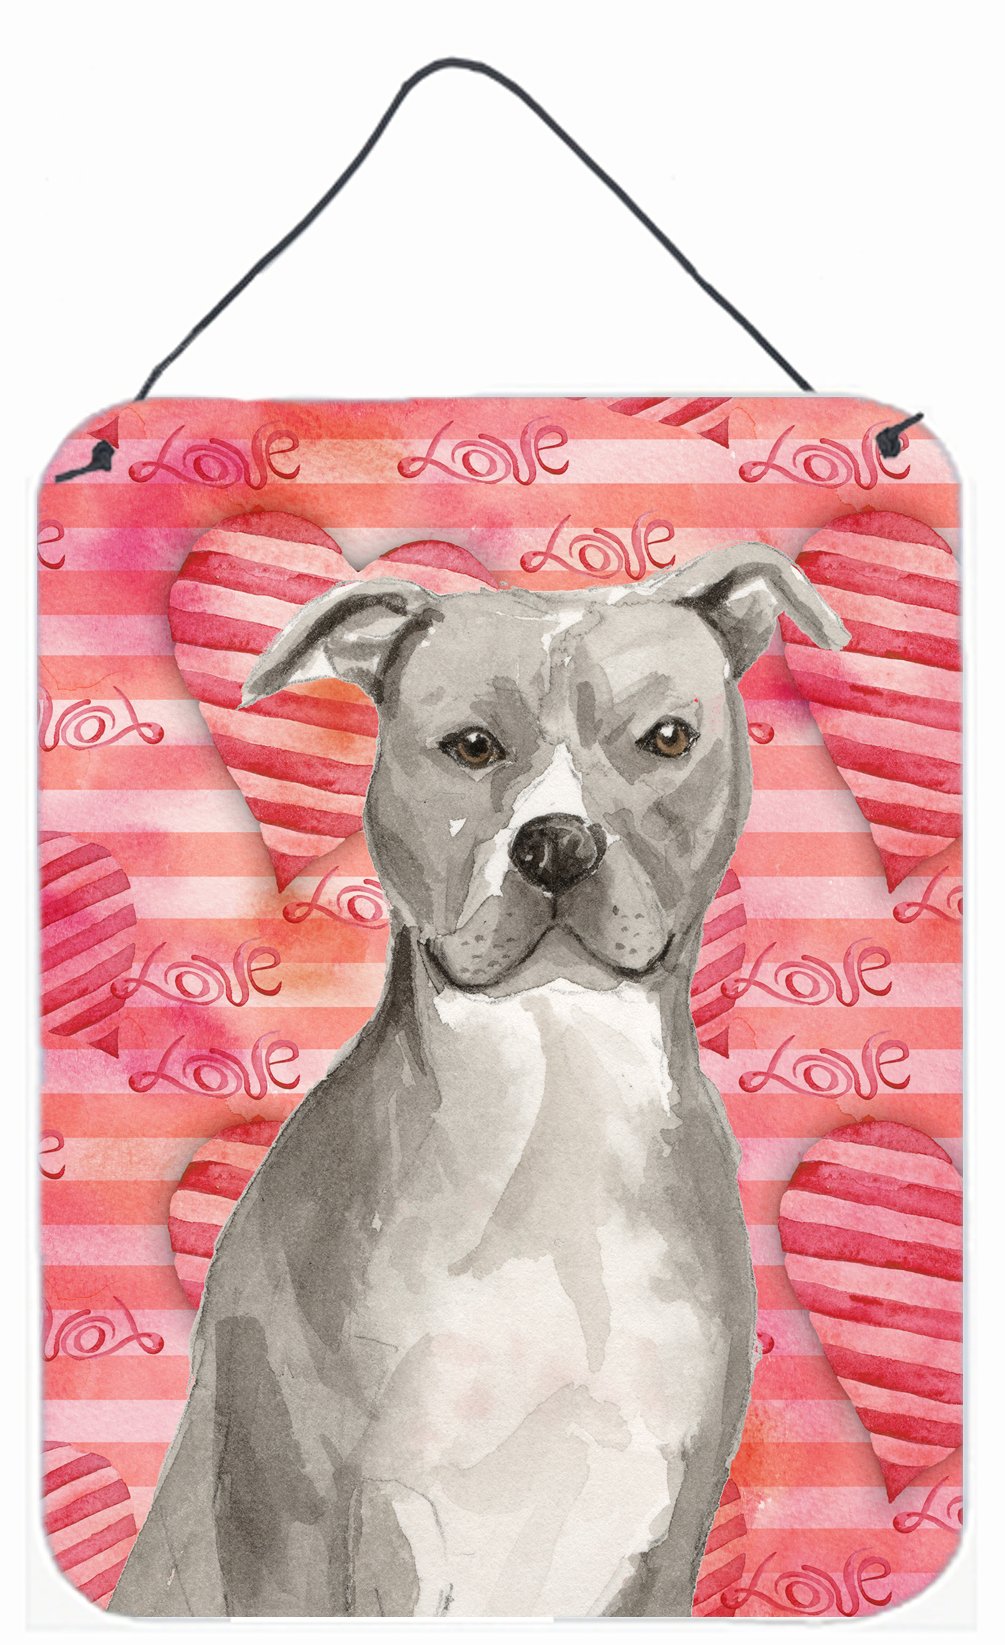 Staffordshire Bull Terrier Love Wall or Door Hanging Prints BB9465DS1216 by Caroline's Treasures